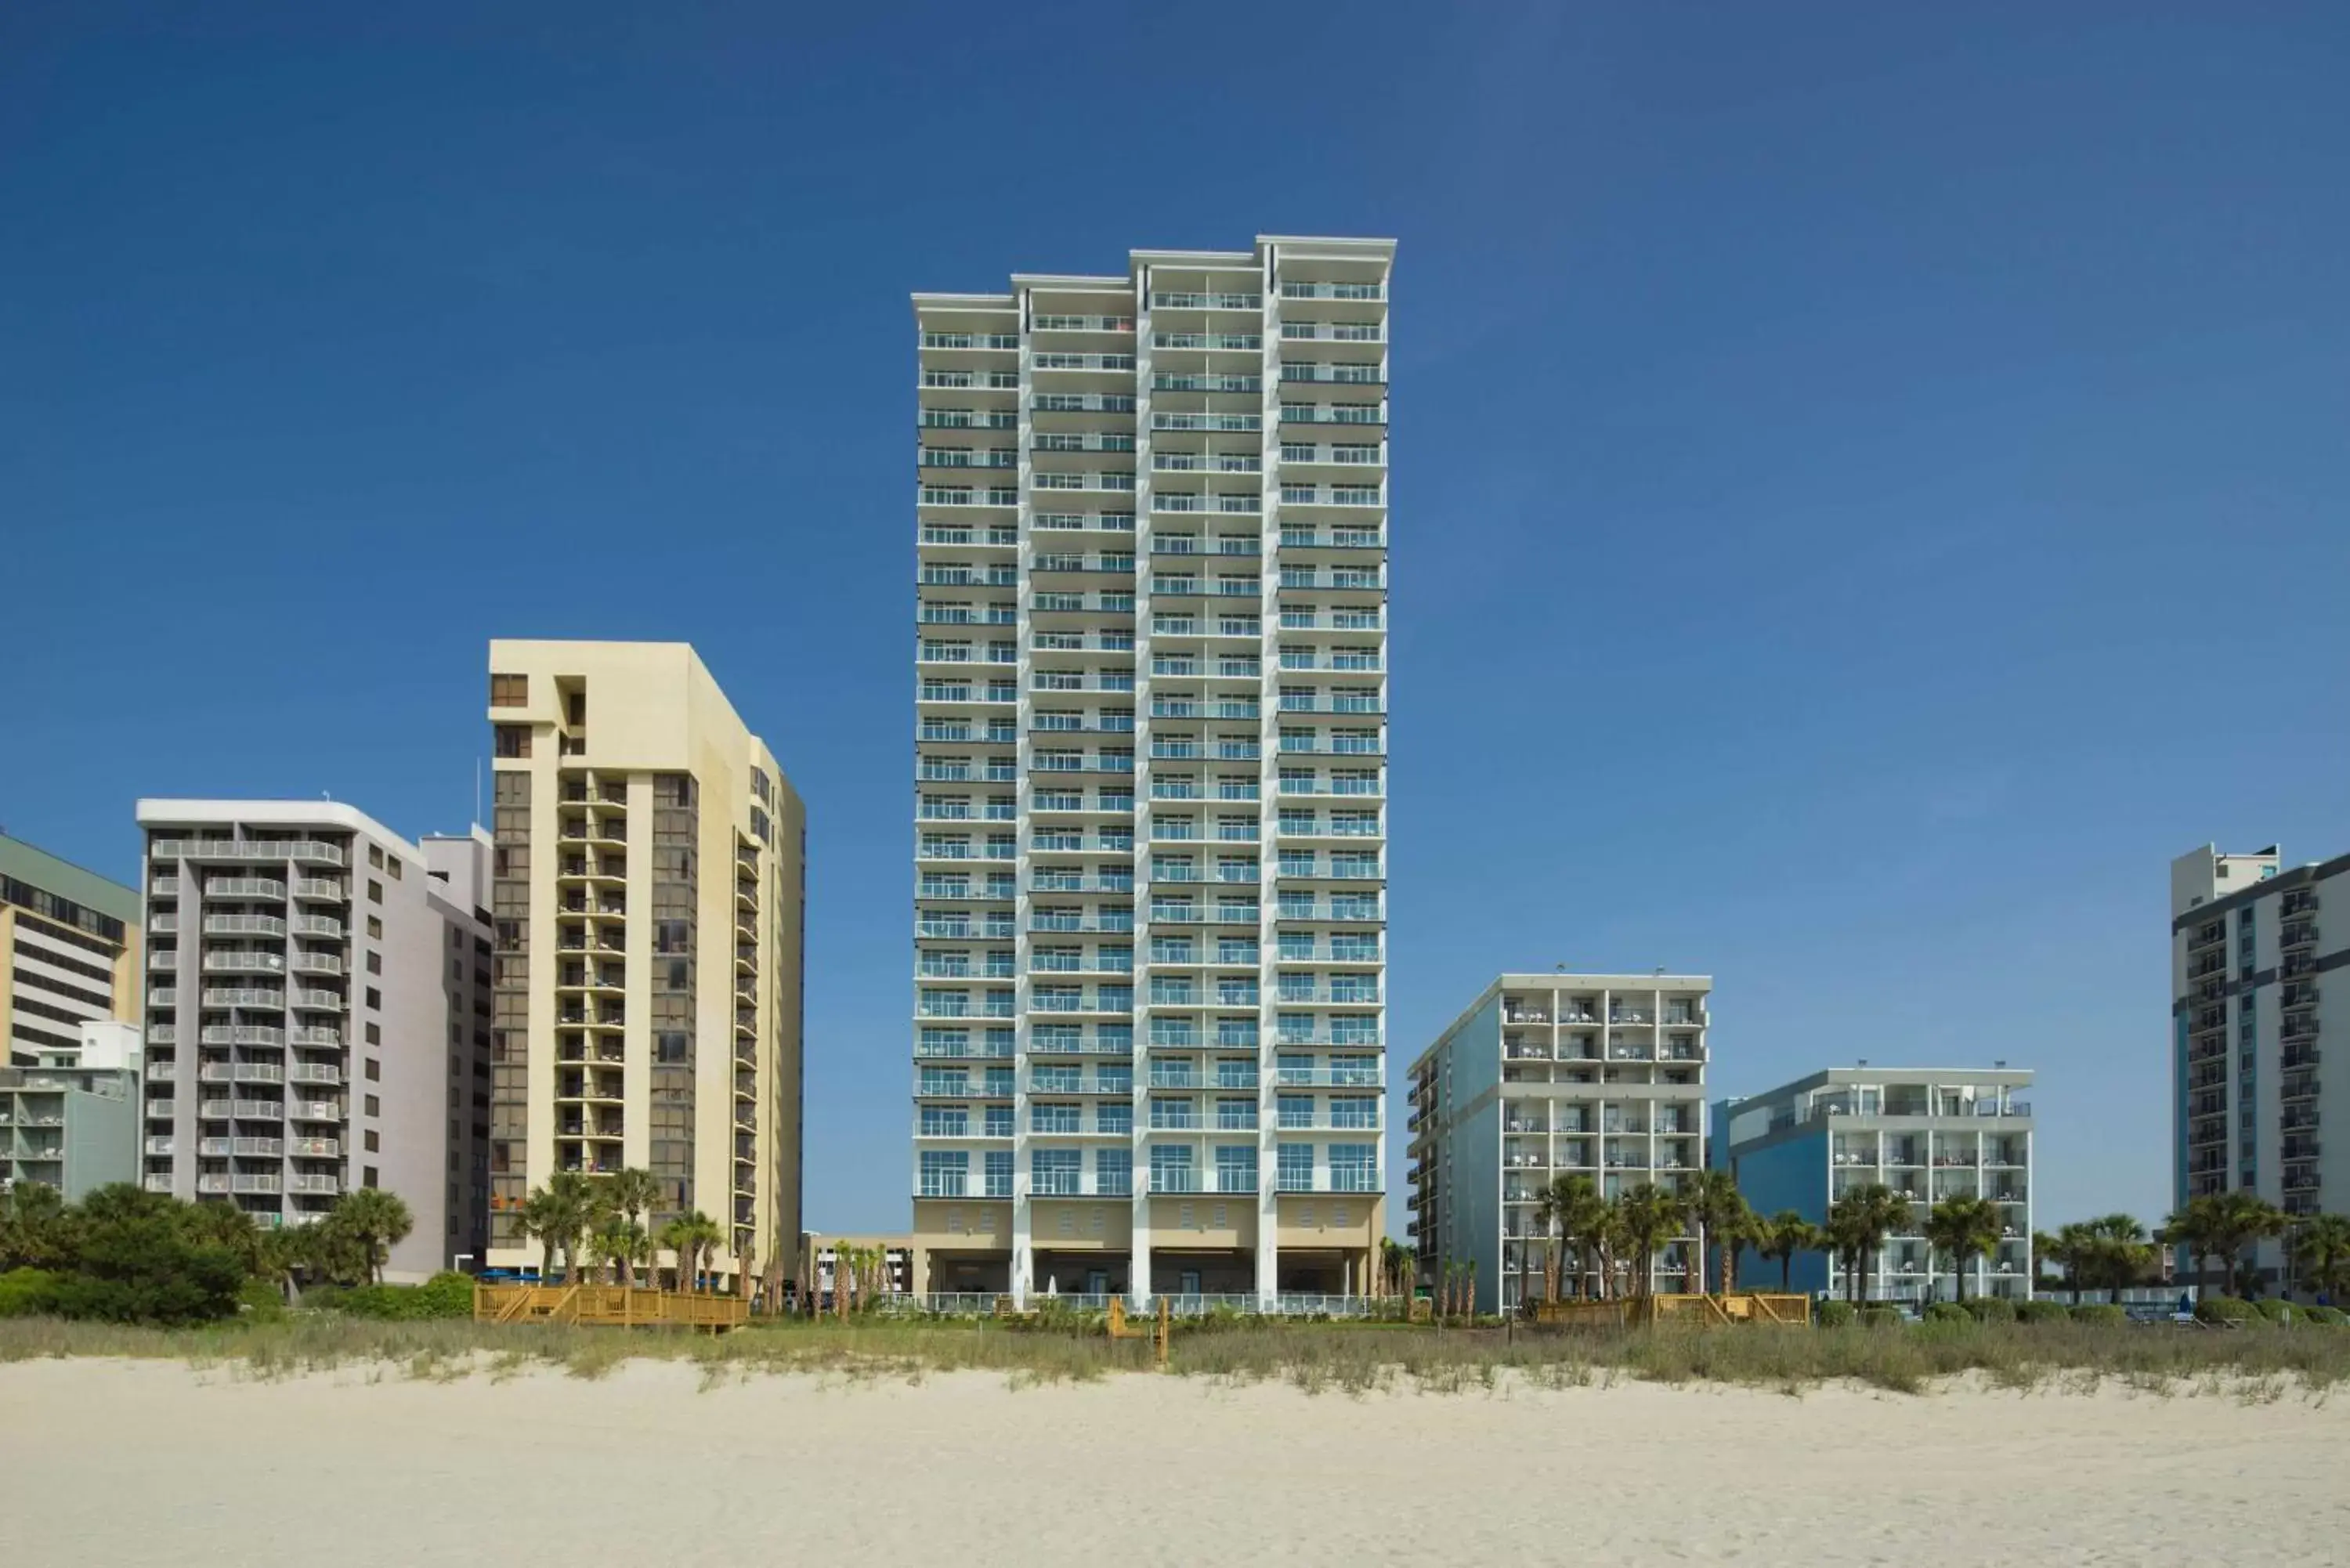 Property Building in Hilton Grand Vacations Club Ocean 22 Myrtle Beach